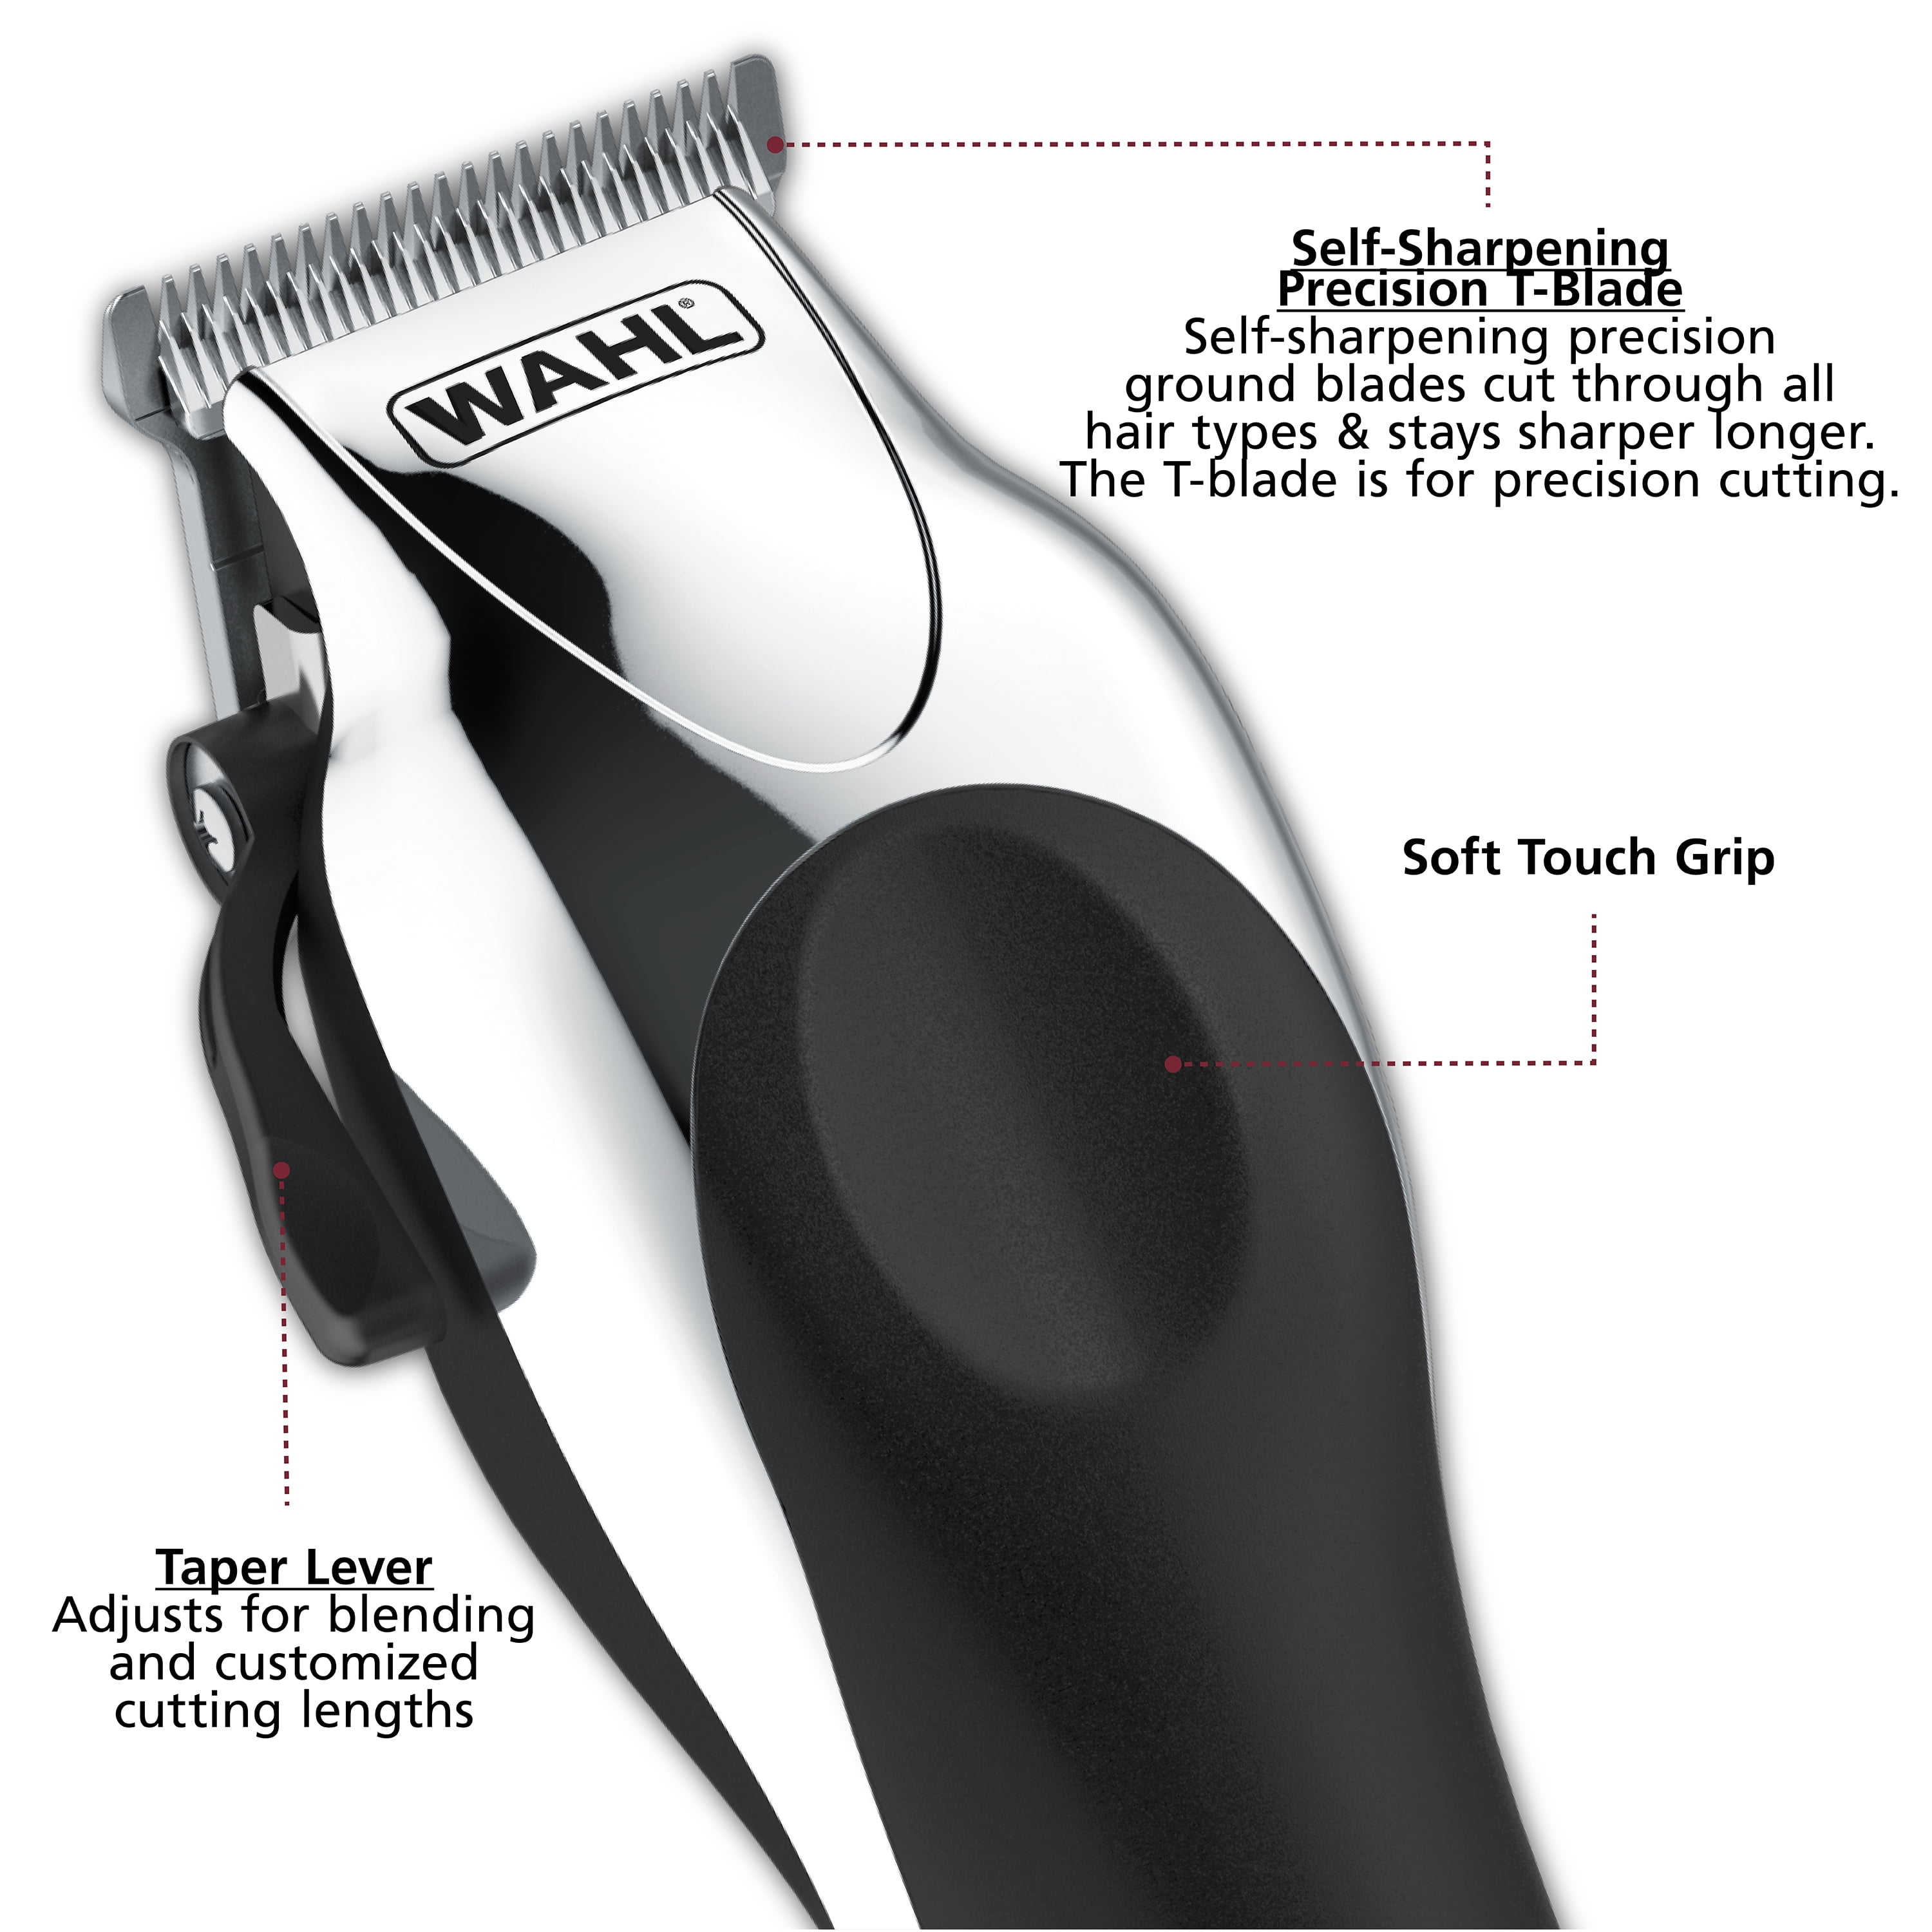 wahl precision clippers